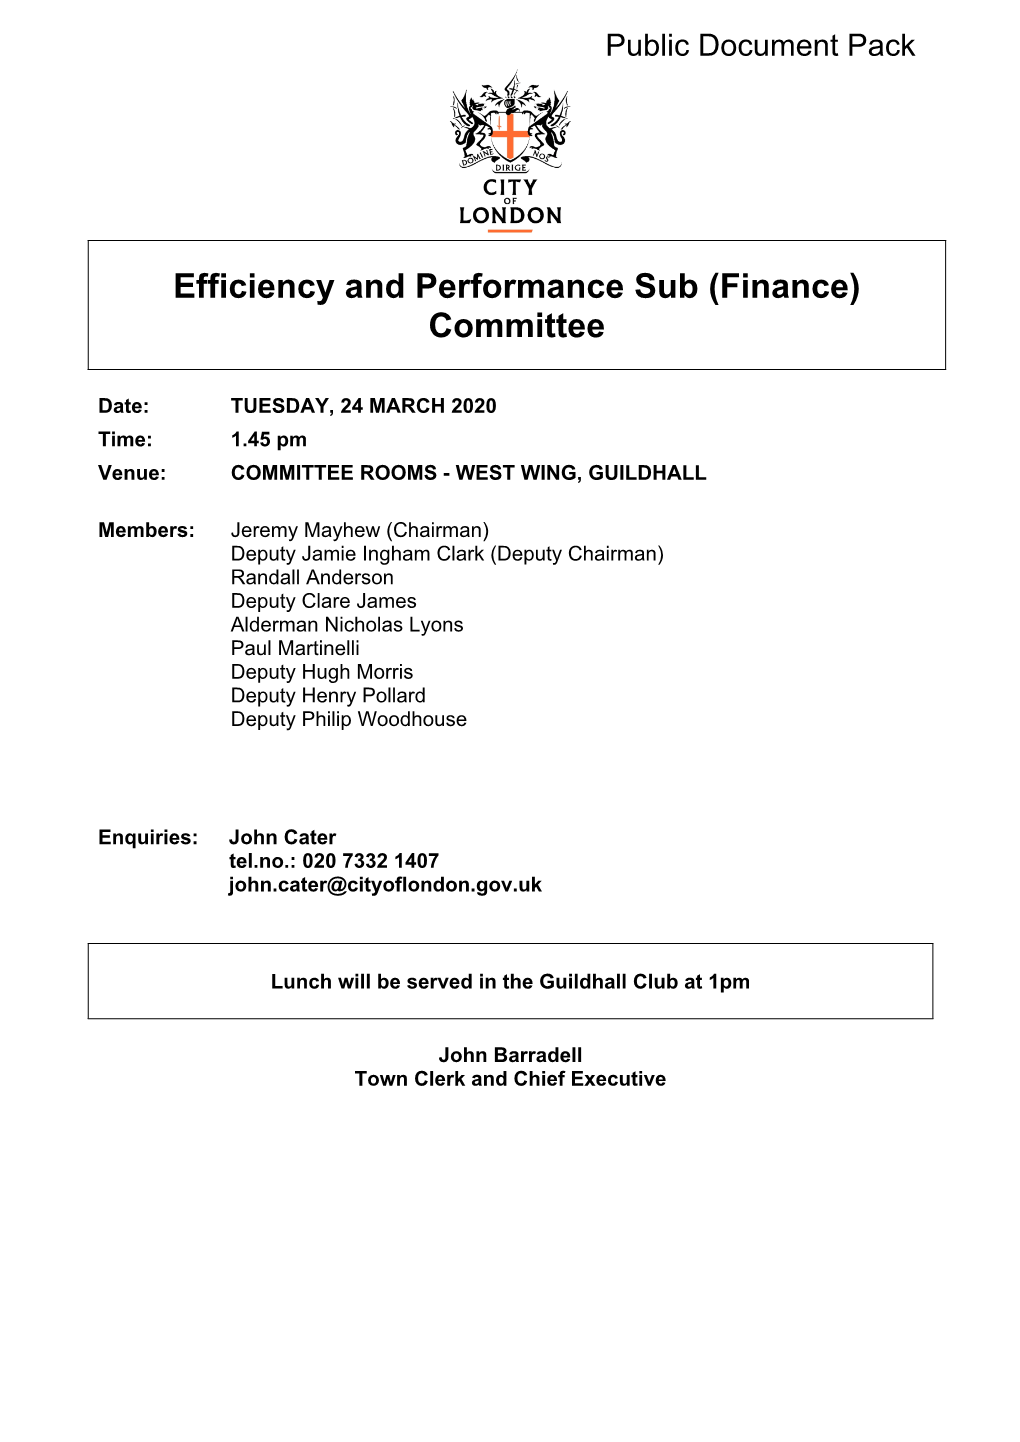 (Public Pack)Agenda Document for Efficiency and Performance Sub (Finance) Committee, 24/03/2020 13:45